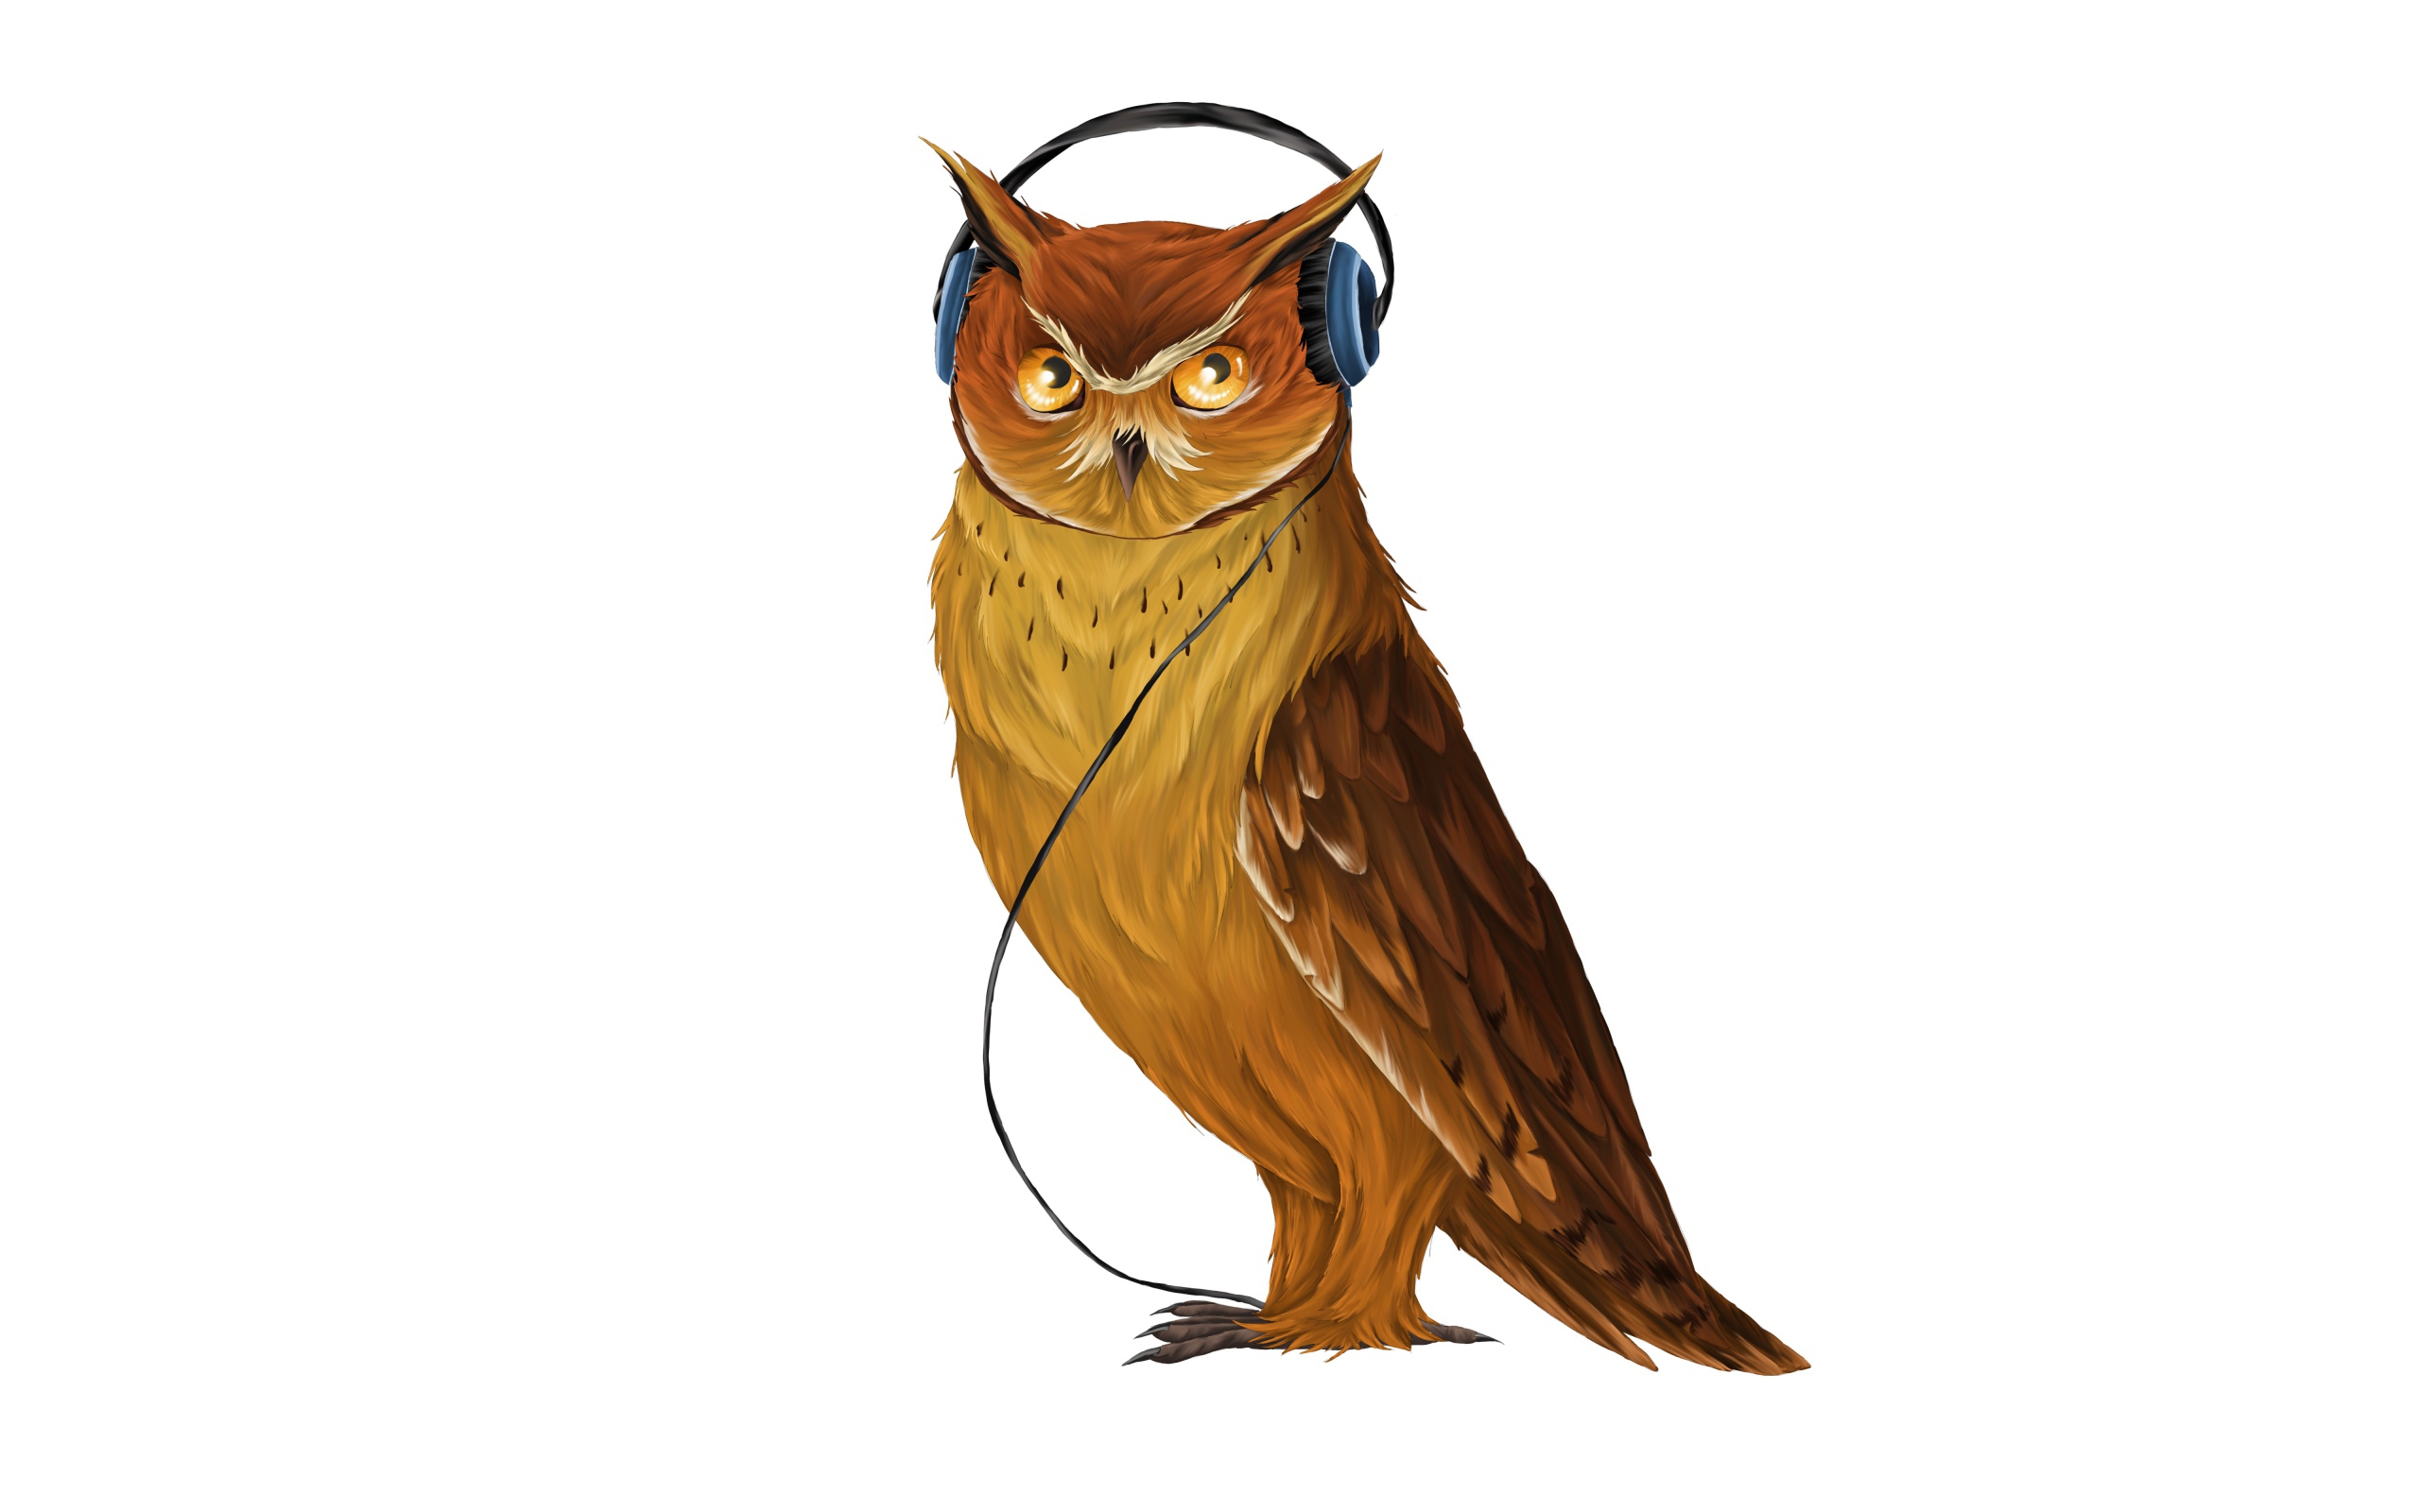 Painted owl in headphones on a white background